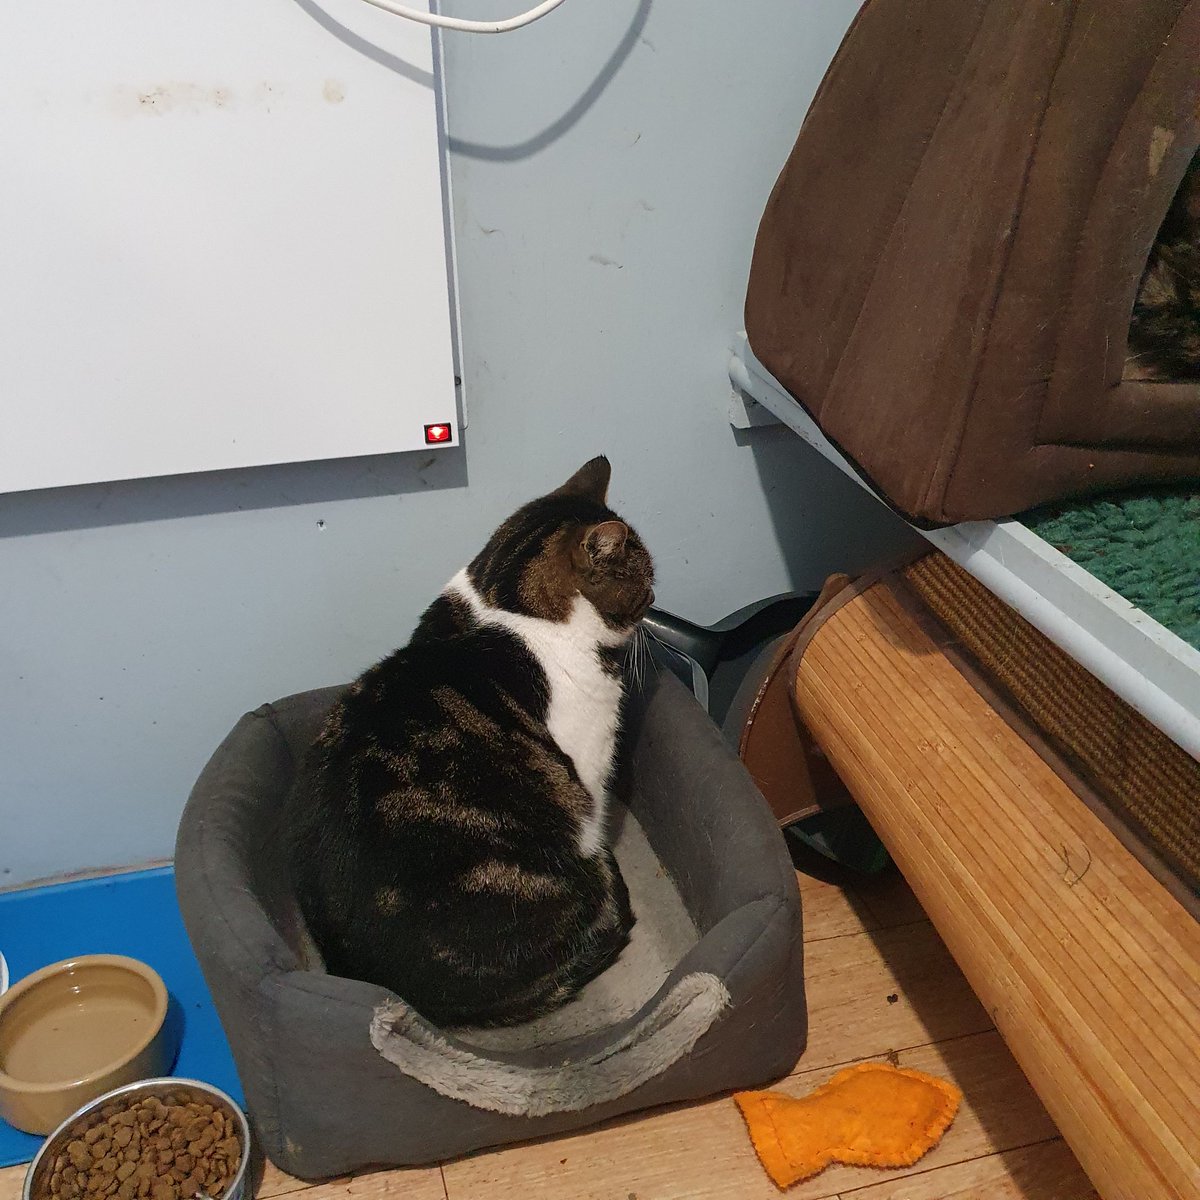 #Caturday ~ Morris has decided to try out the cat bed  next to the radiator. So he must be feeling the cold. Who can blame him for being very sensible 😹 #inthecompanyofcats #rescuecat #catsense #catcharity #purrfectfeline #sponsorcat